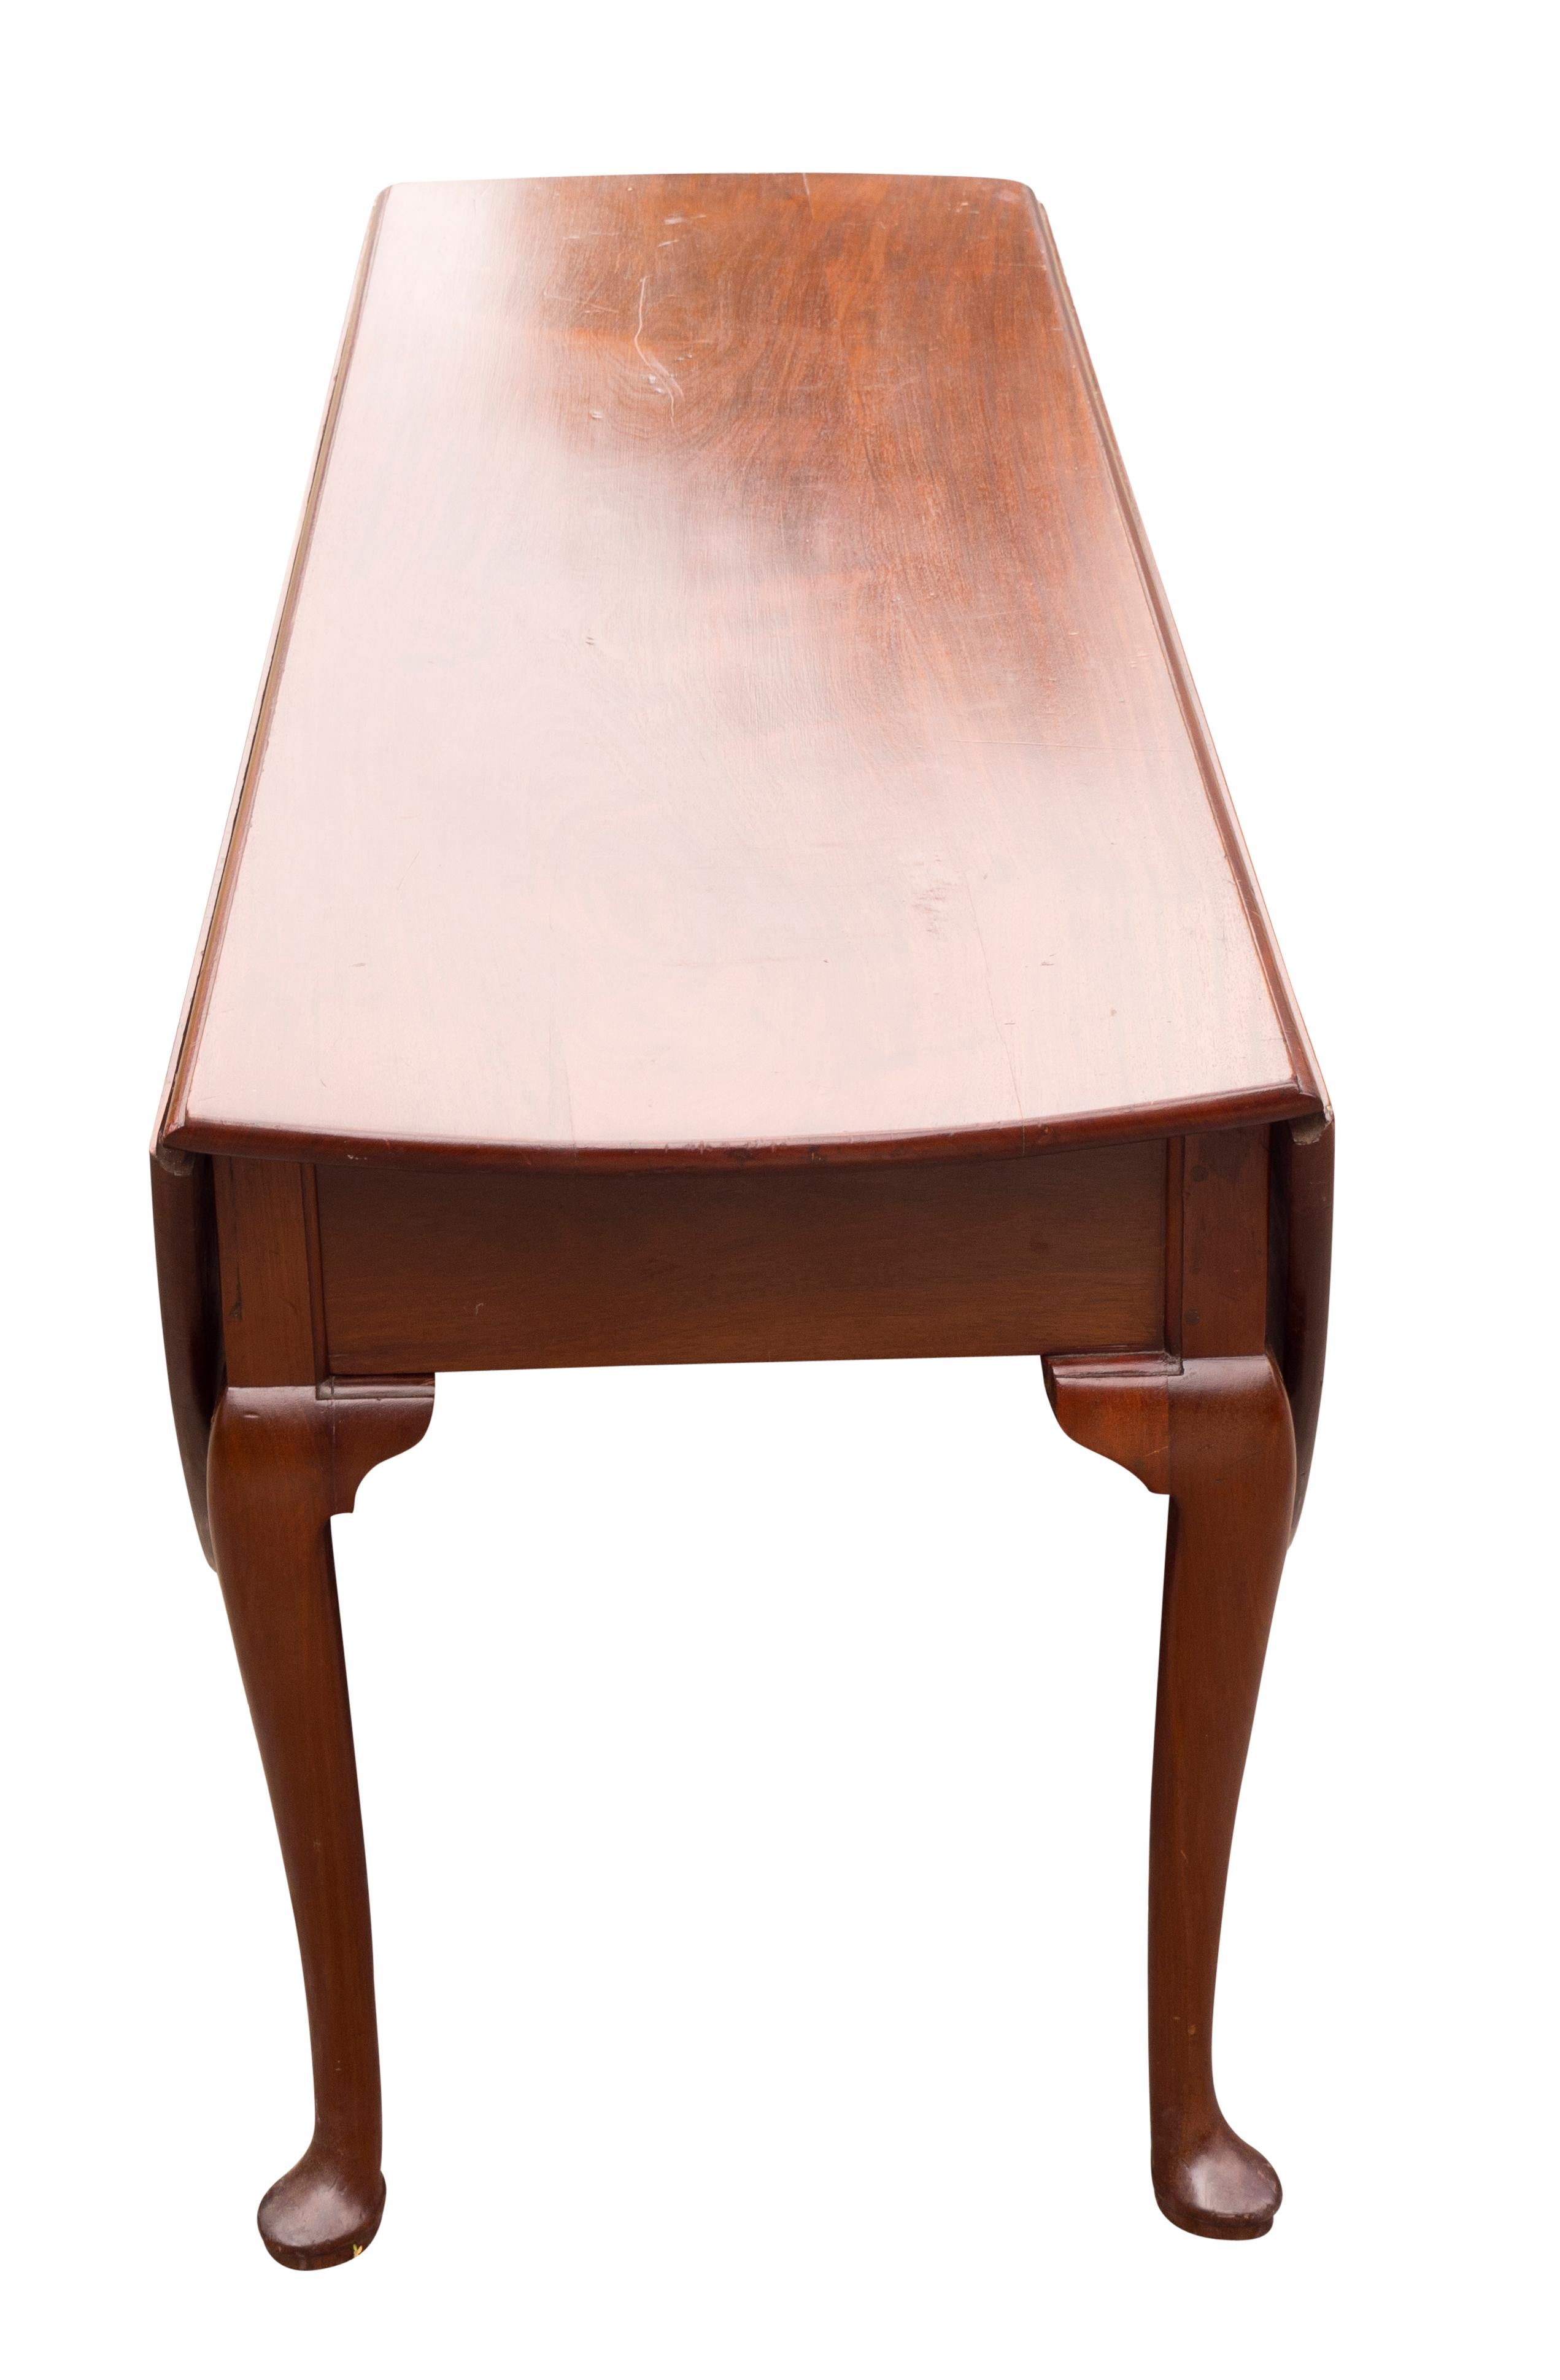 A large table with deep drop leaves opening to almost a circle, with swing out cabriole legs ending on pad feet.